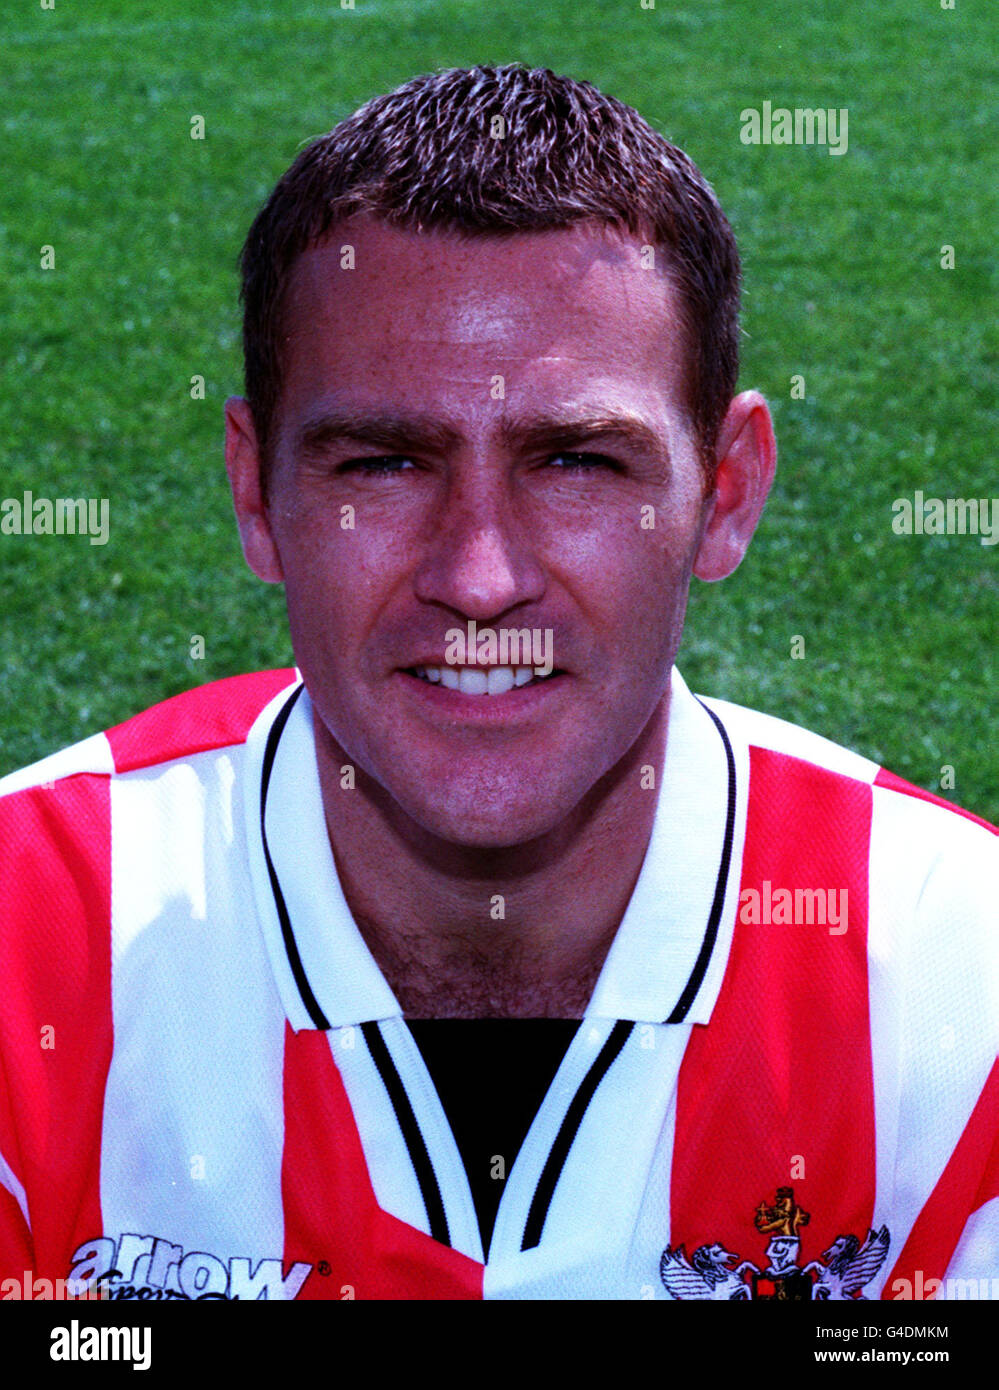 EXETER CITY FC. JIMMY GARDNER OF EXETER CITY FOOTBALL CLUB. Stock Photo